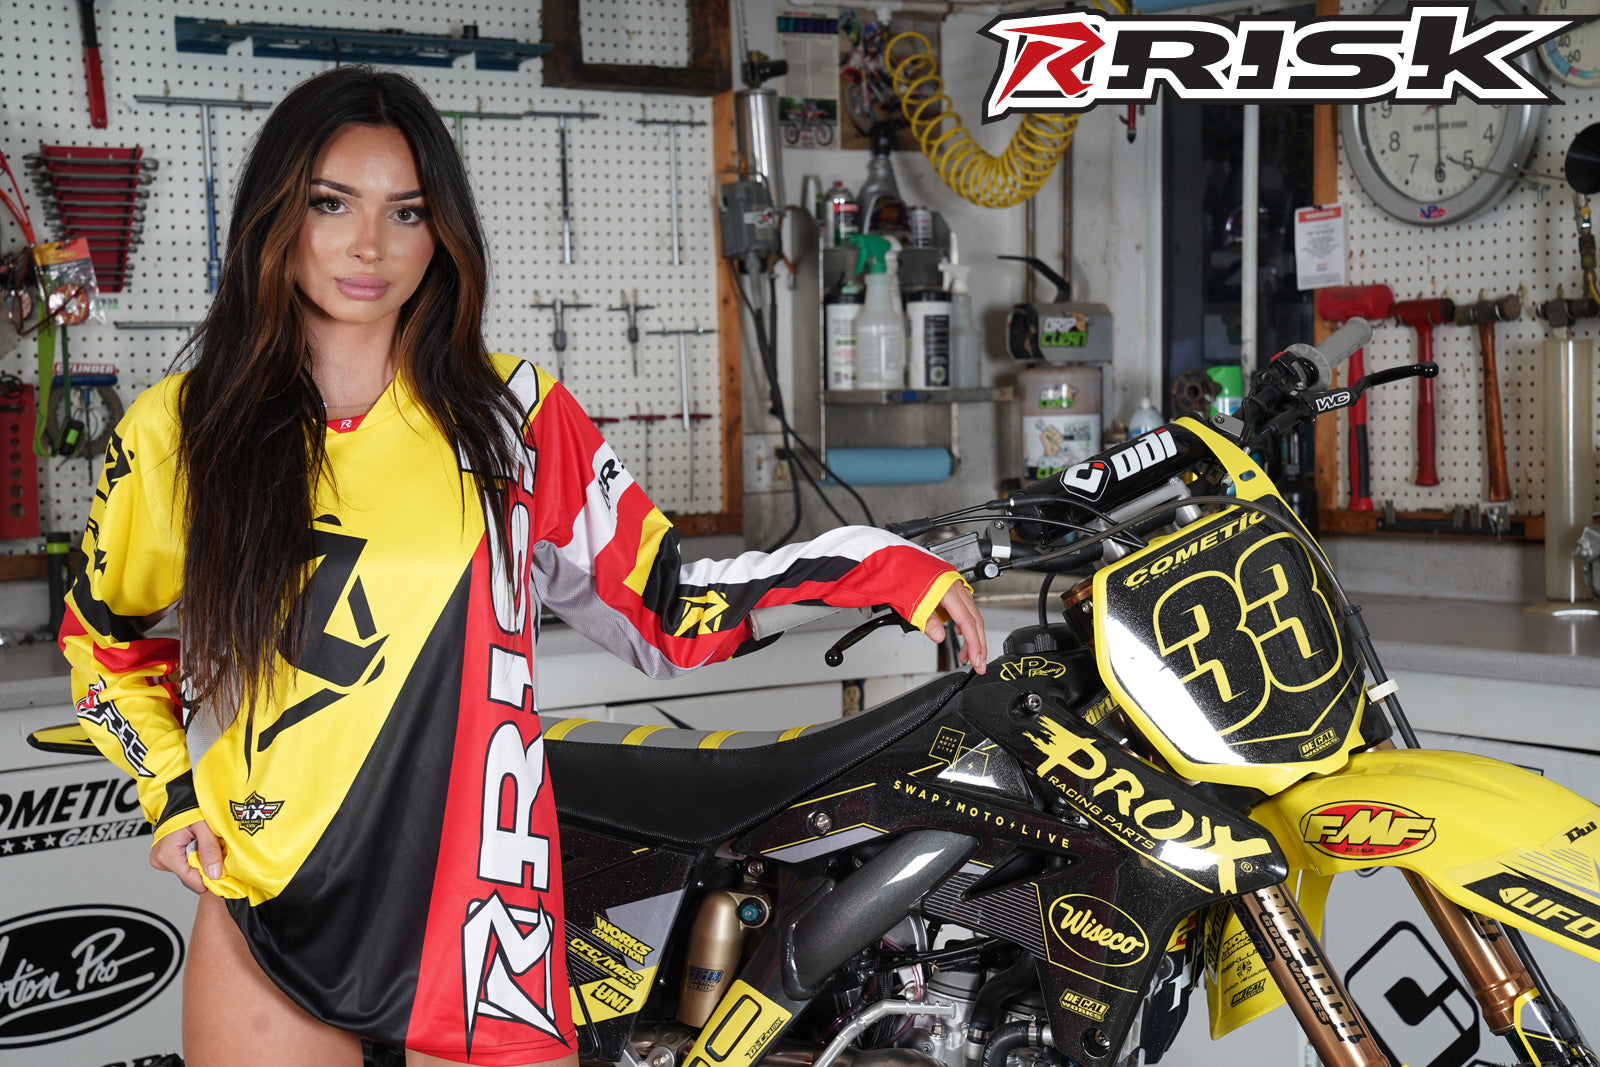 August's Risk Racing Moto Model Samantha Heady posing in various bikinis & Risk Racing Jerseys next to a dirt bike that's sitting on a Risk Racing ATS stand - Pose #24